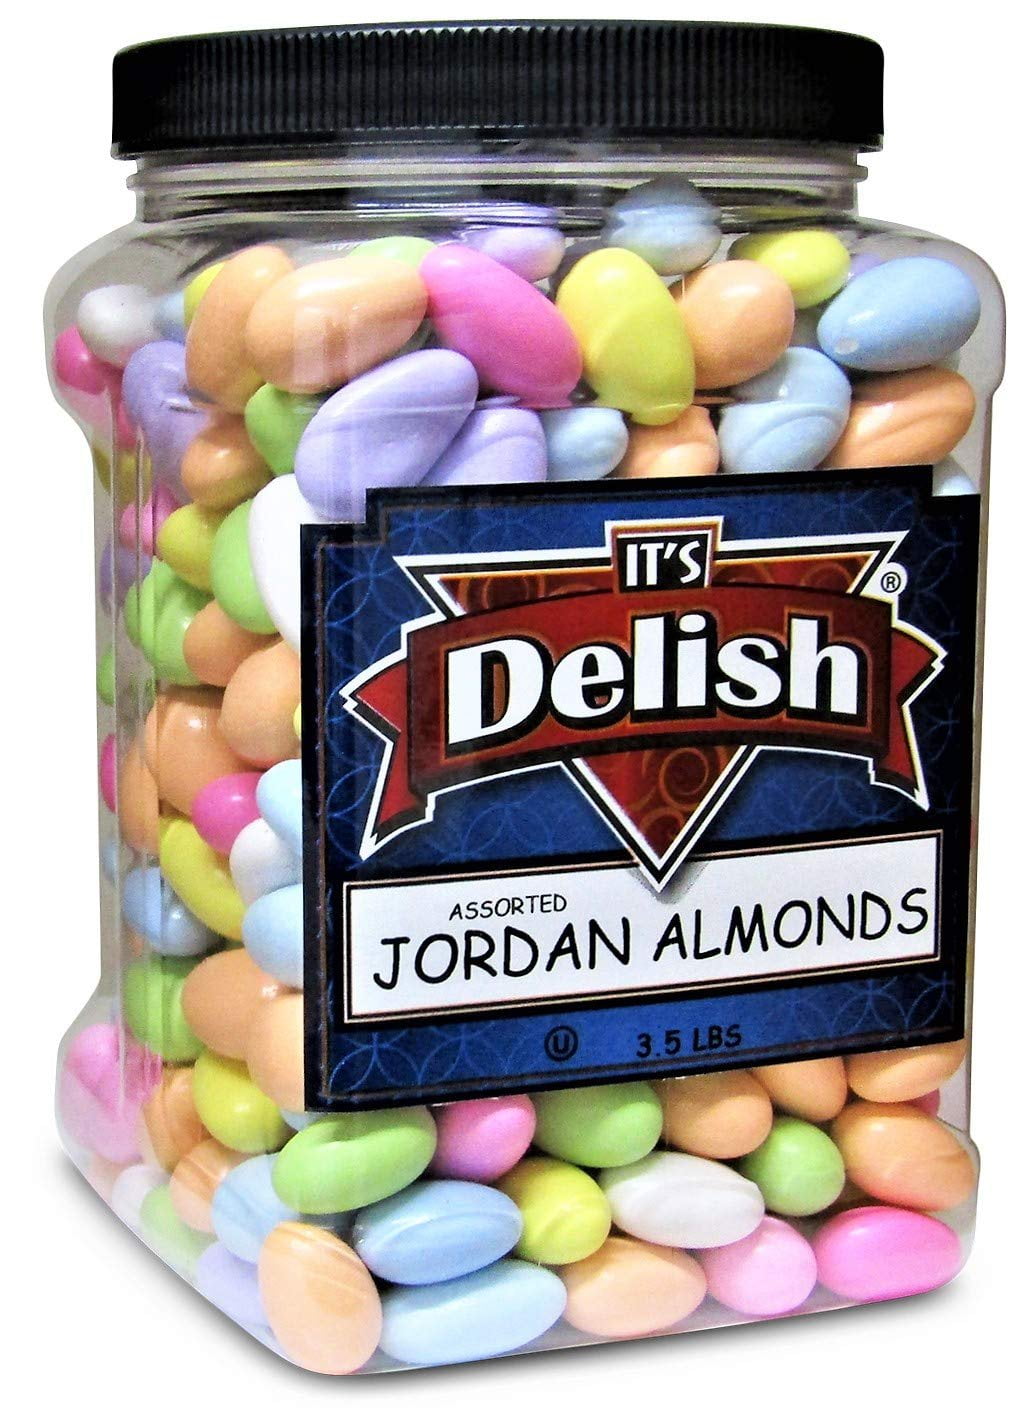 Assorted Jordan Almonds by Its Delish, 3.5 lbs Jumbo Container Pastel ...